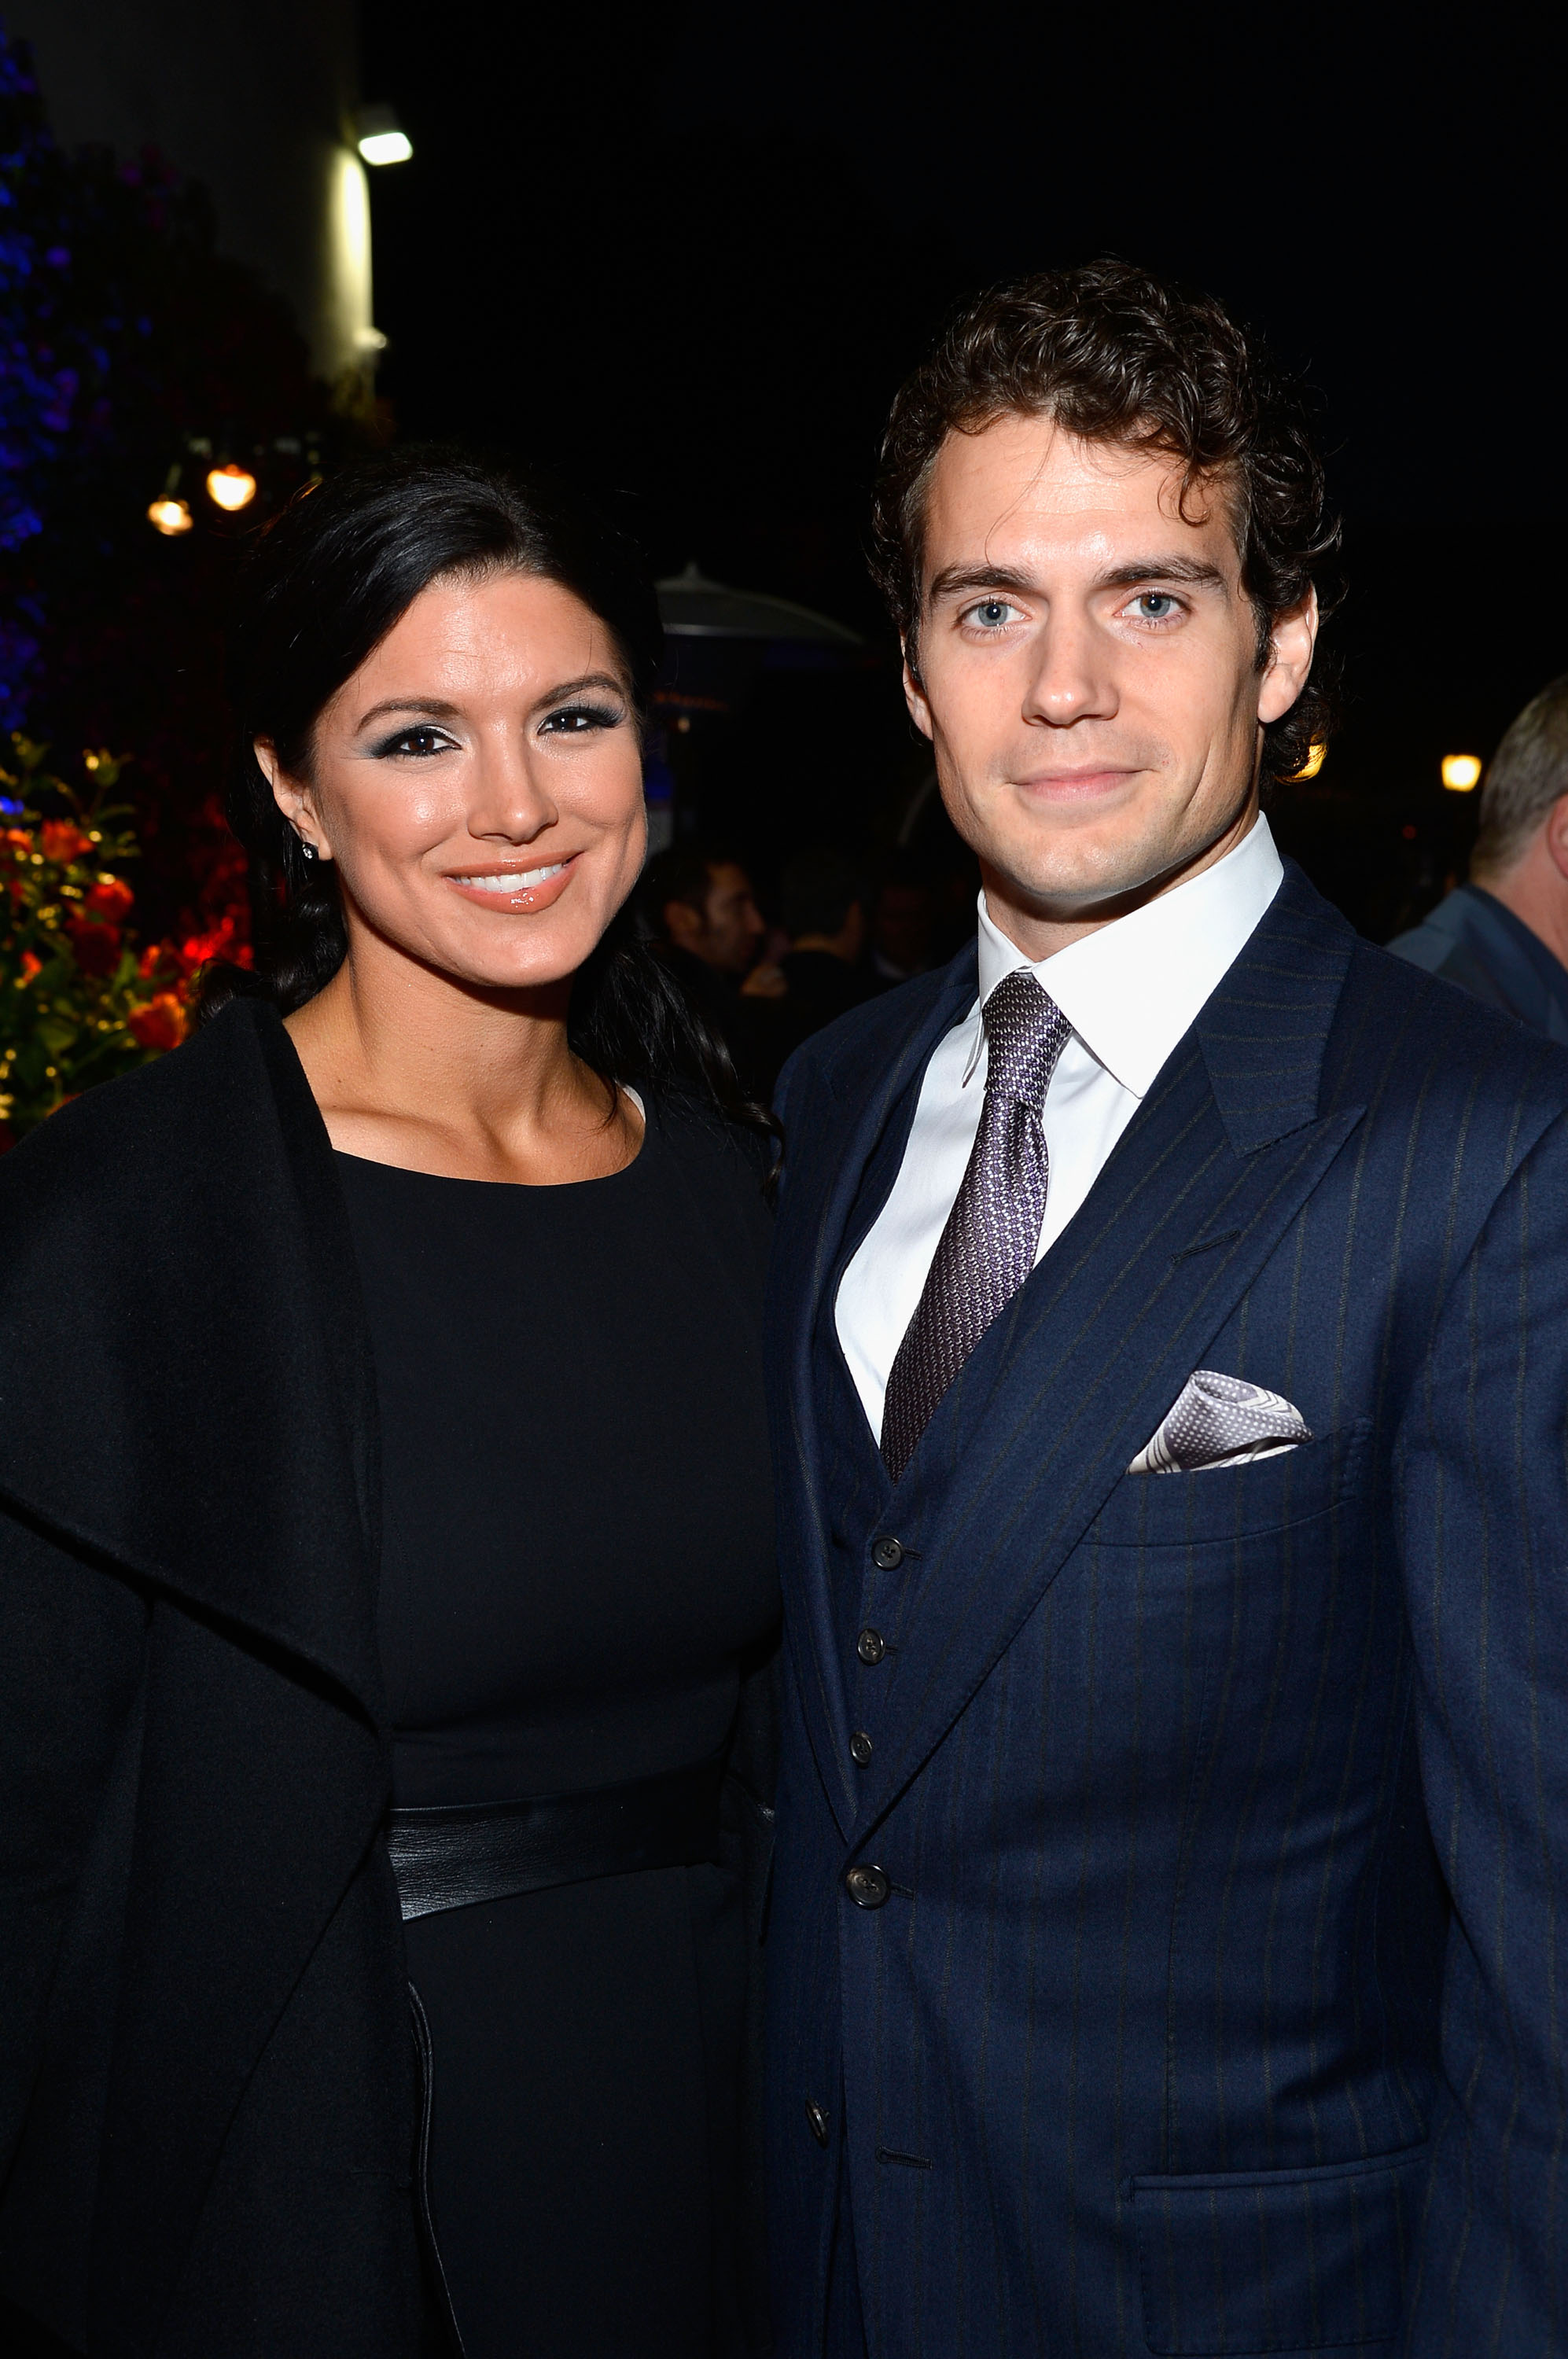 The actor had an on-off relationship with martial artist and actress Gina Carano